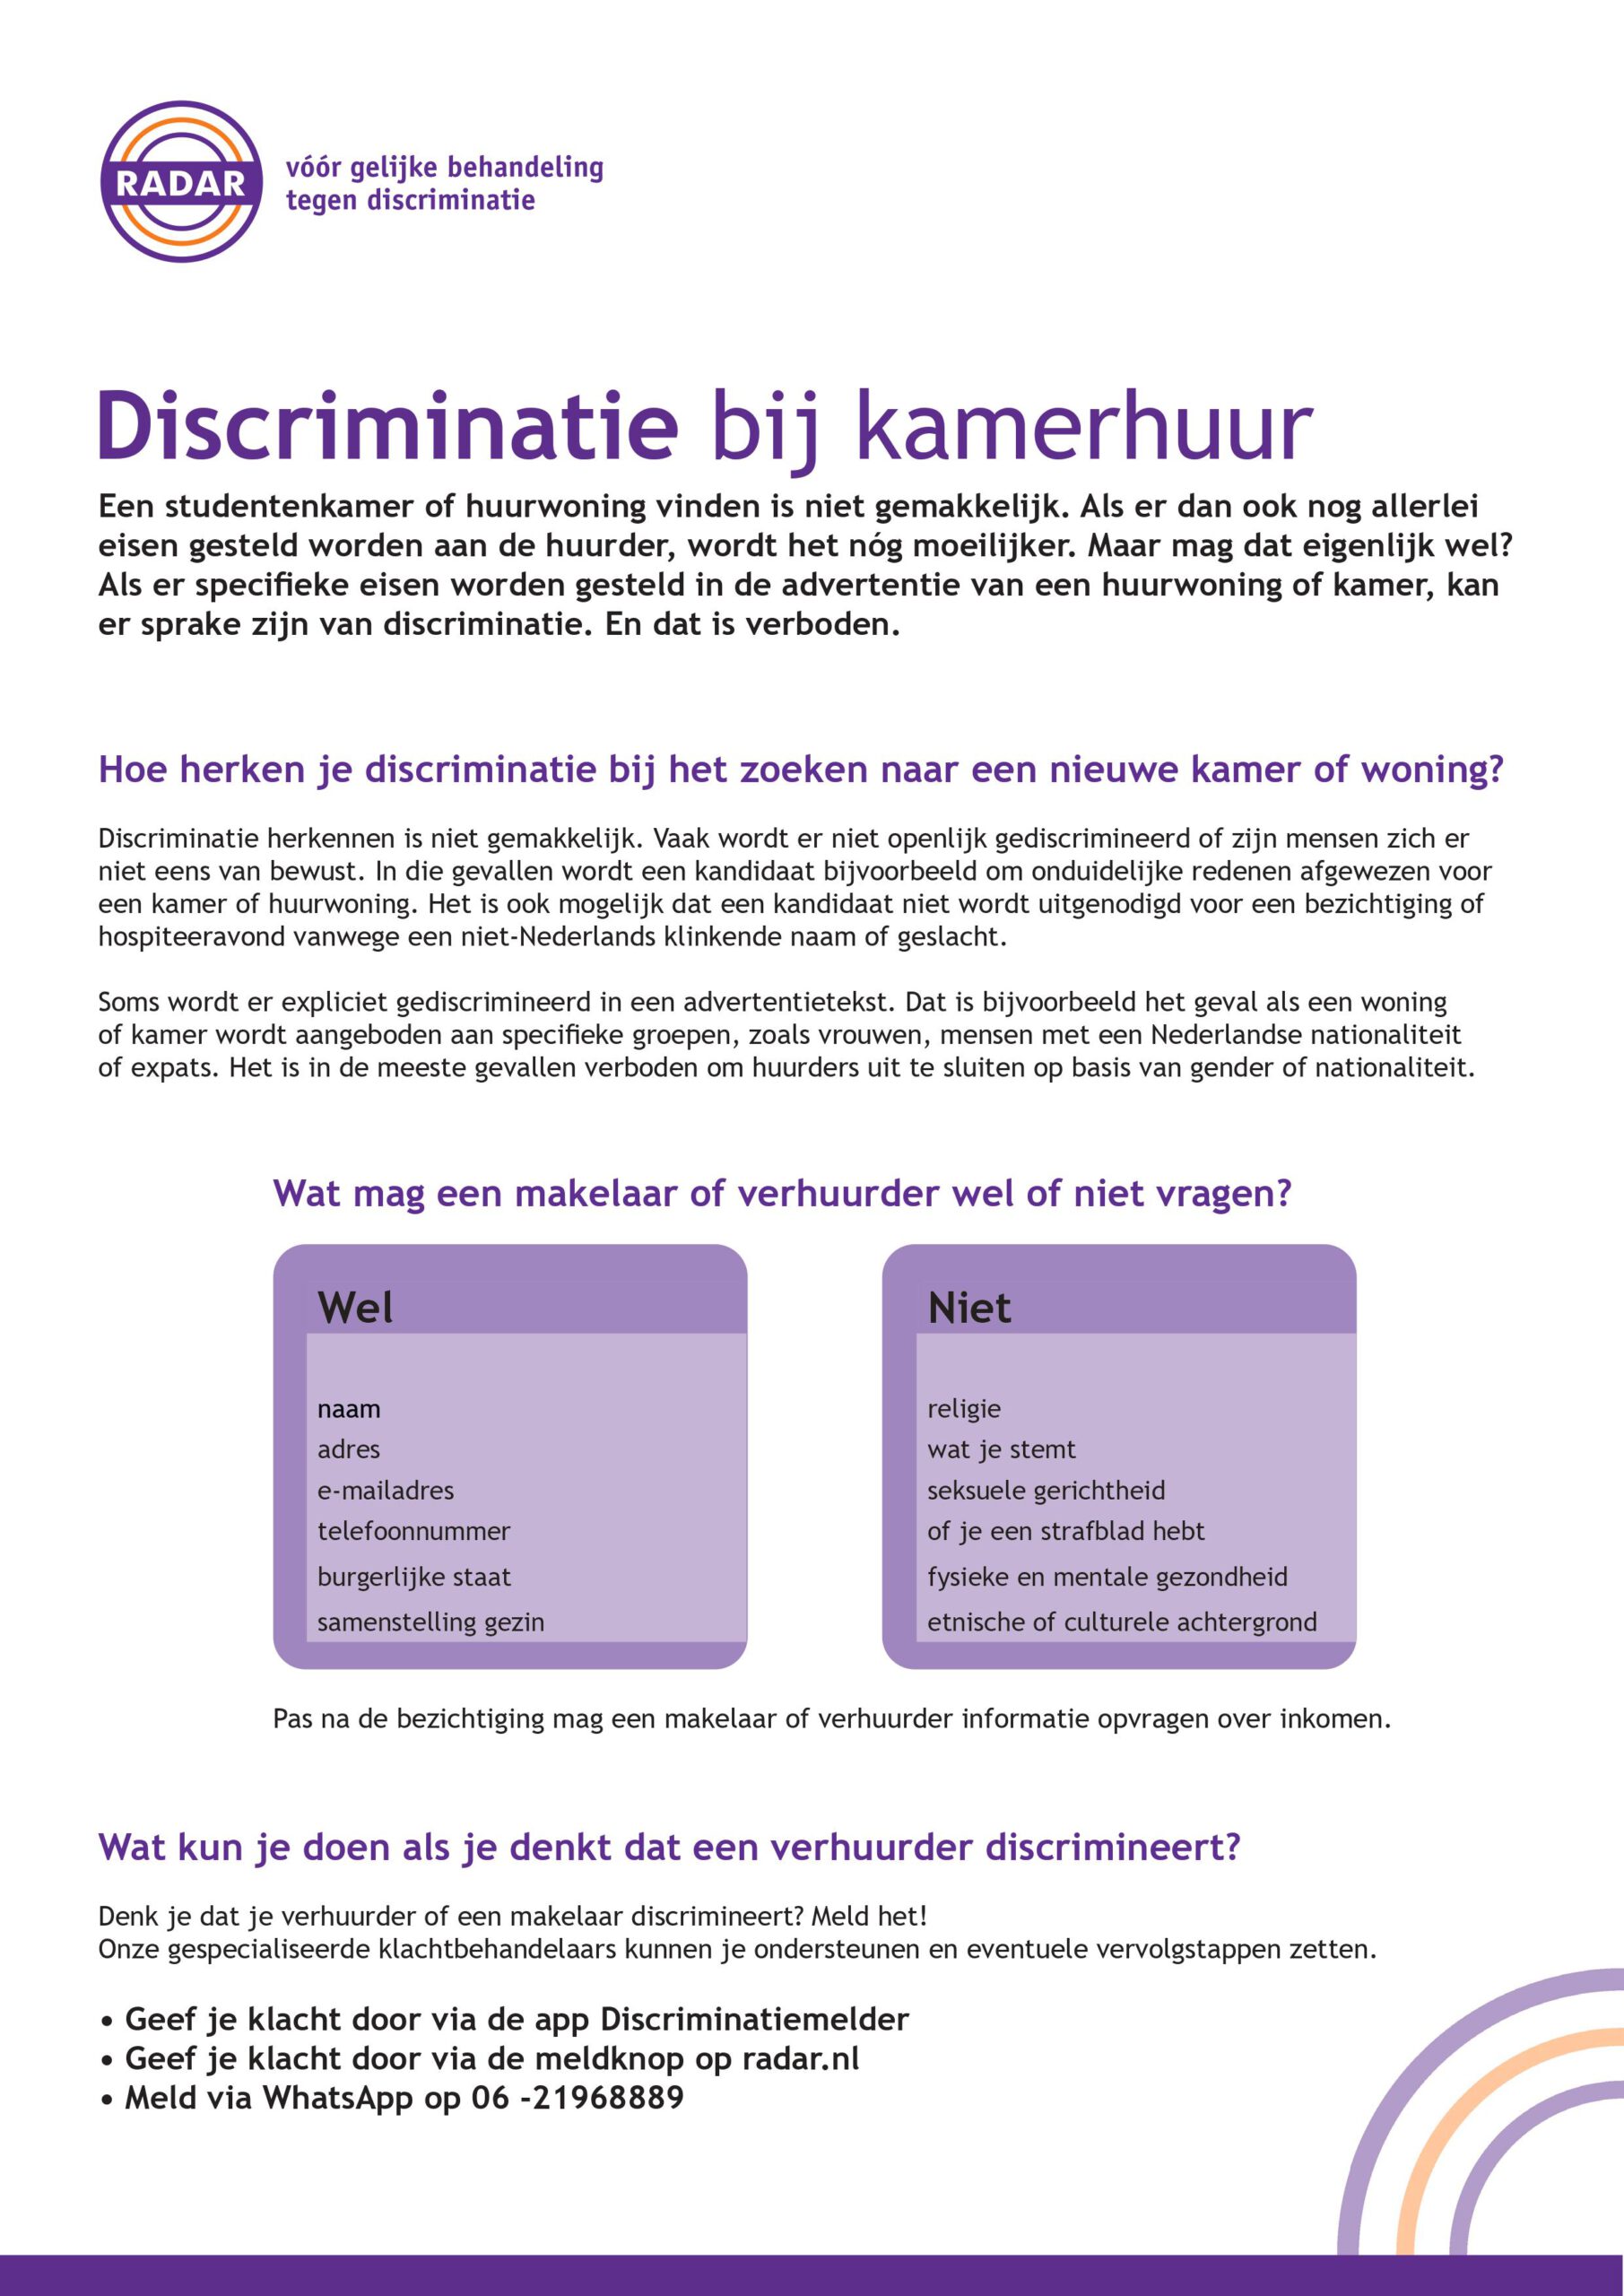 Discrimination when you're looking for a new home?!